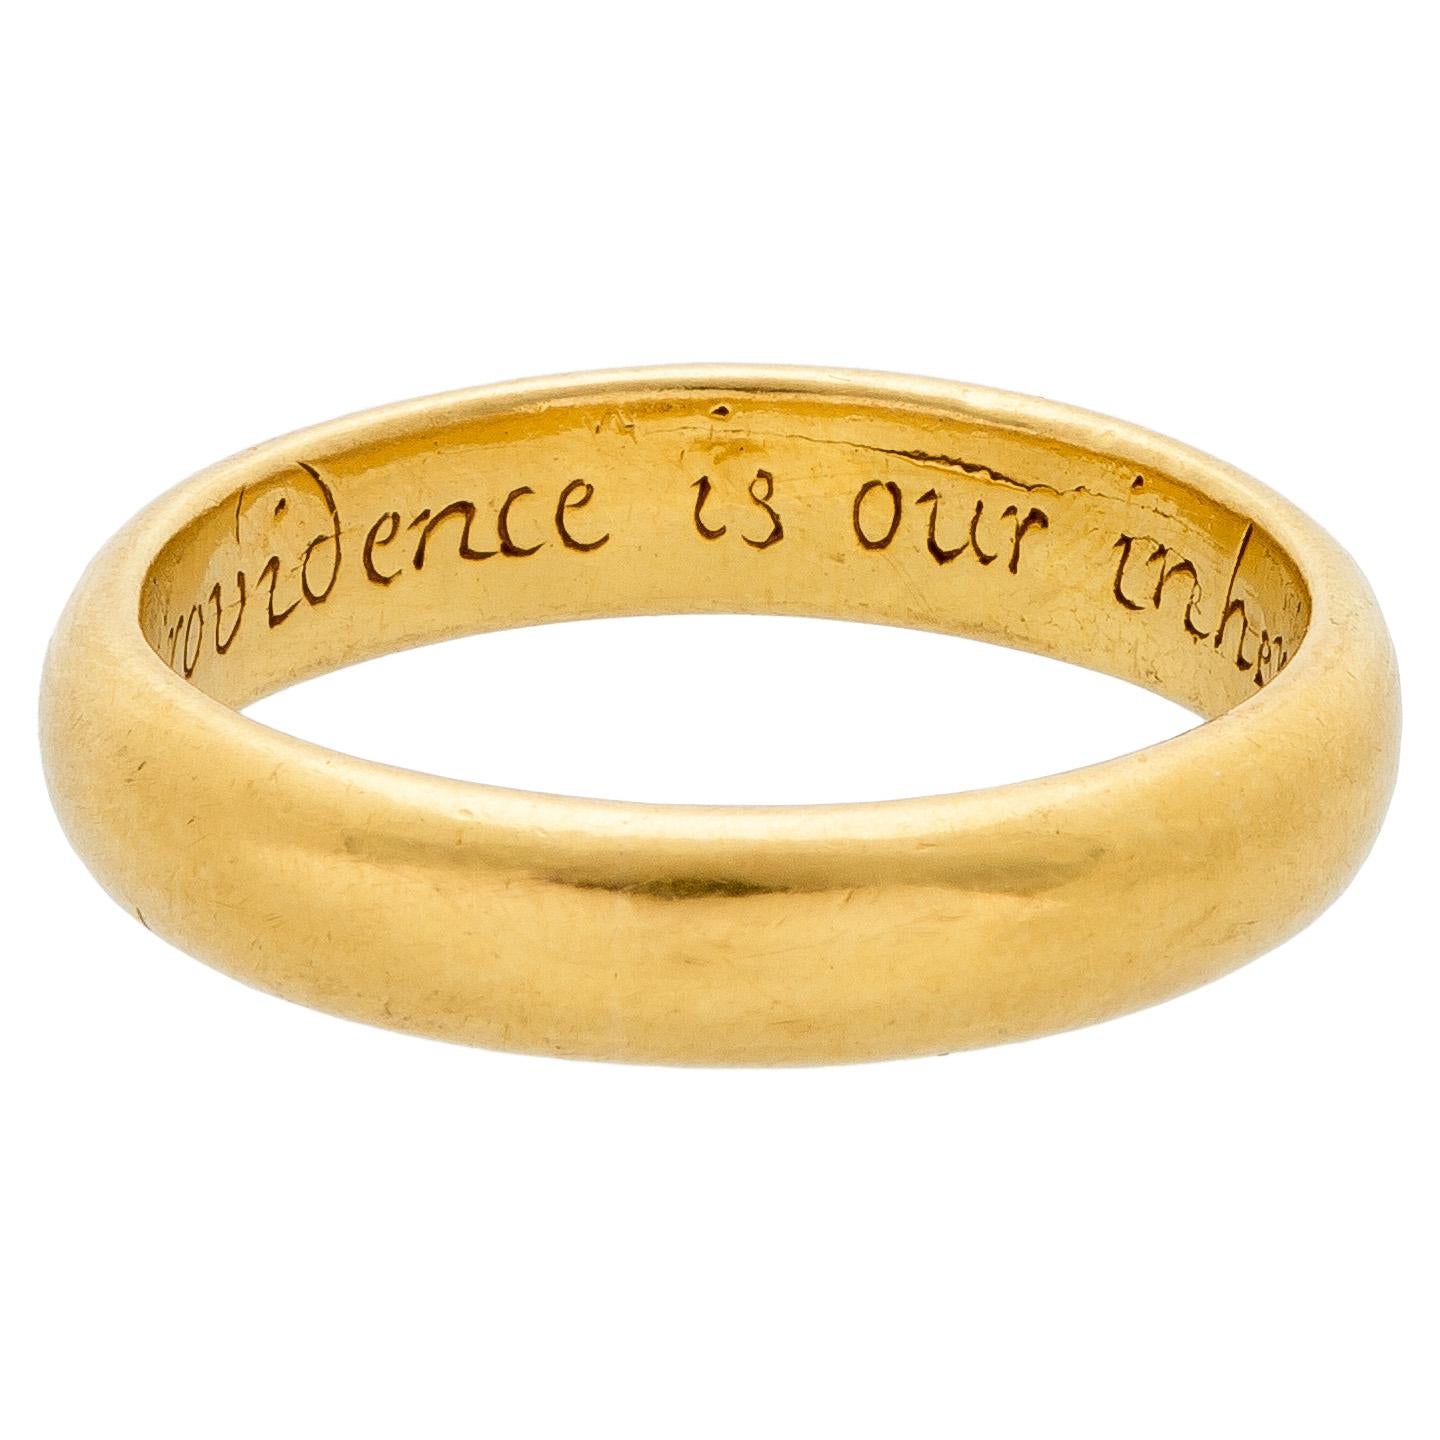 POSY RING “GOD’S PROVIDENCE IS OUR INHERITANCE”
England, 18th century
Gold
Weight 8.2 gr.; circumference: 60.38 mm.; US size 9.25; UK size S ½

The plain gold band with D-section has on the interior the engraved inscription in italic lettering